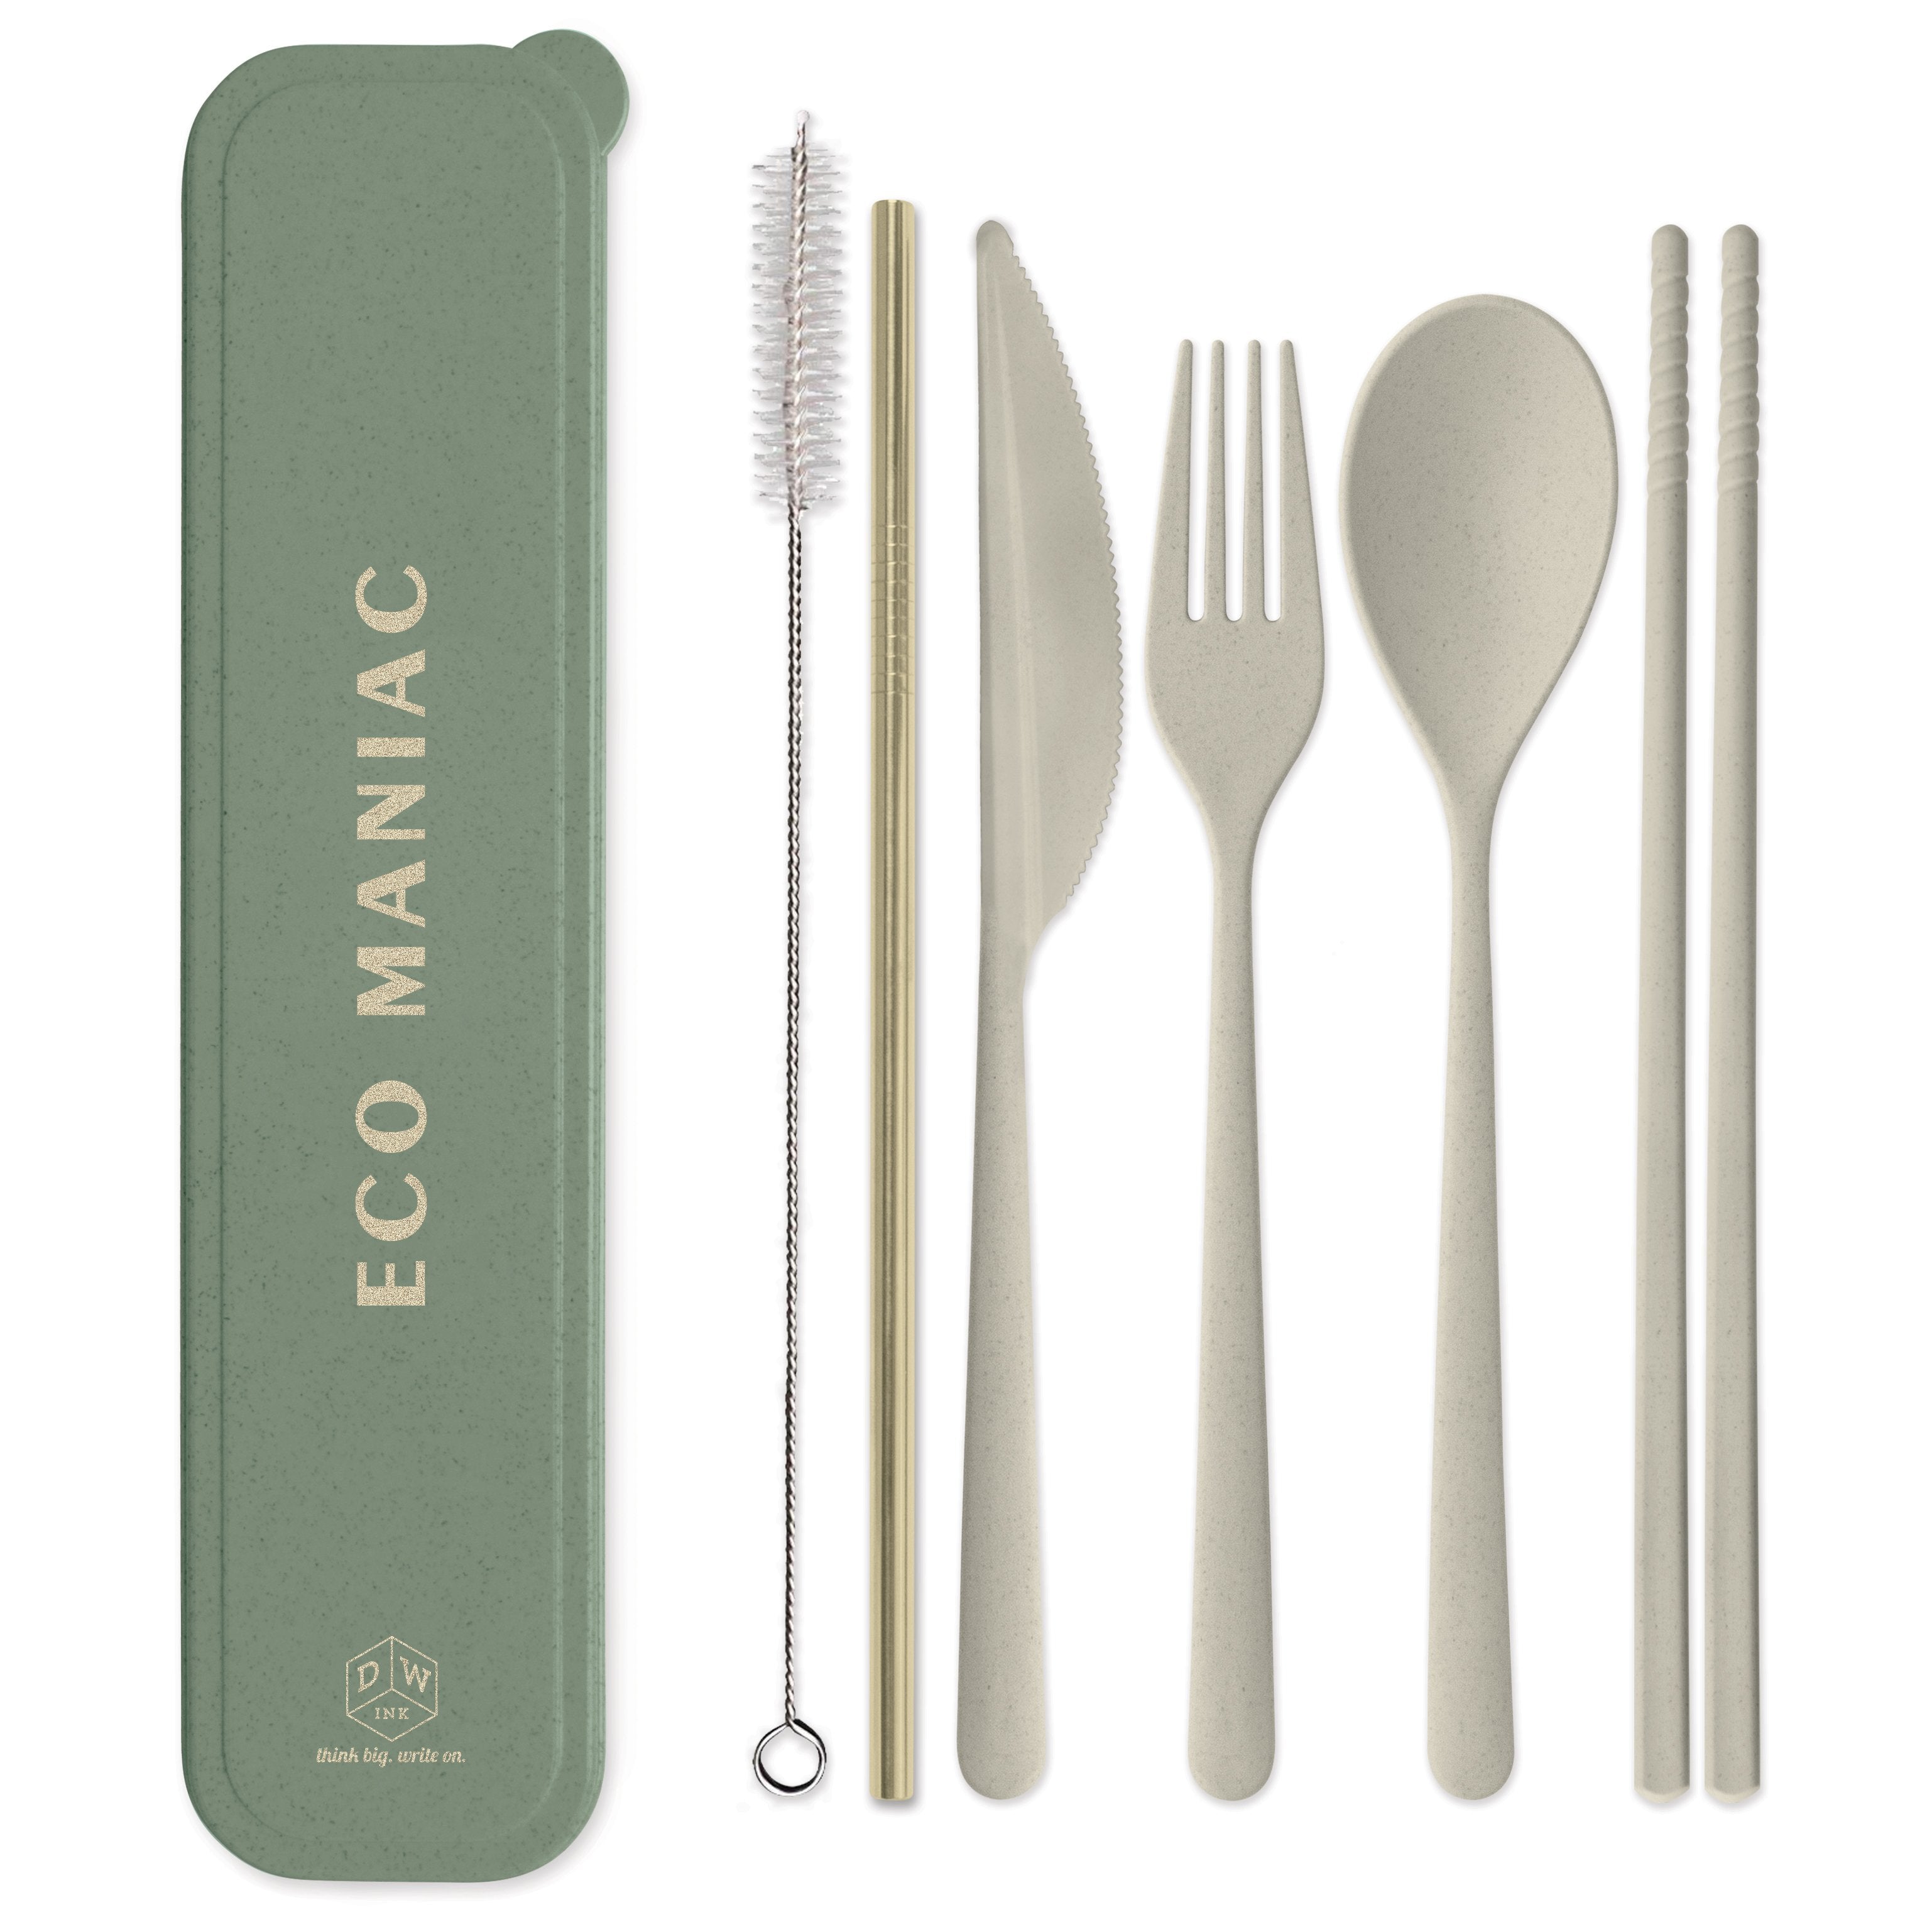 Hommaly Portable Flatware Set Review: Reduce Waste Easily